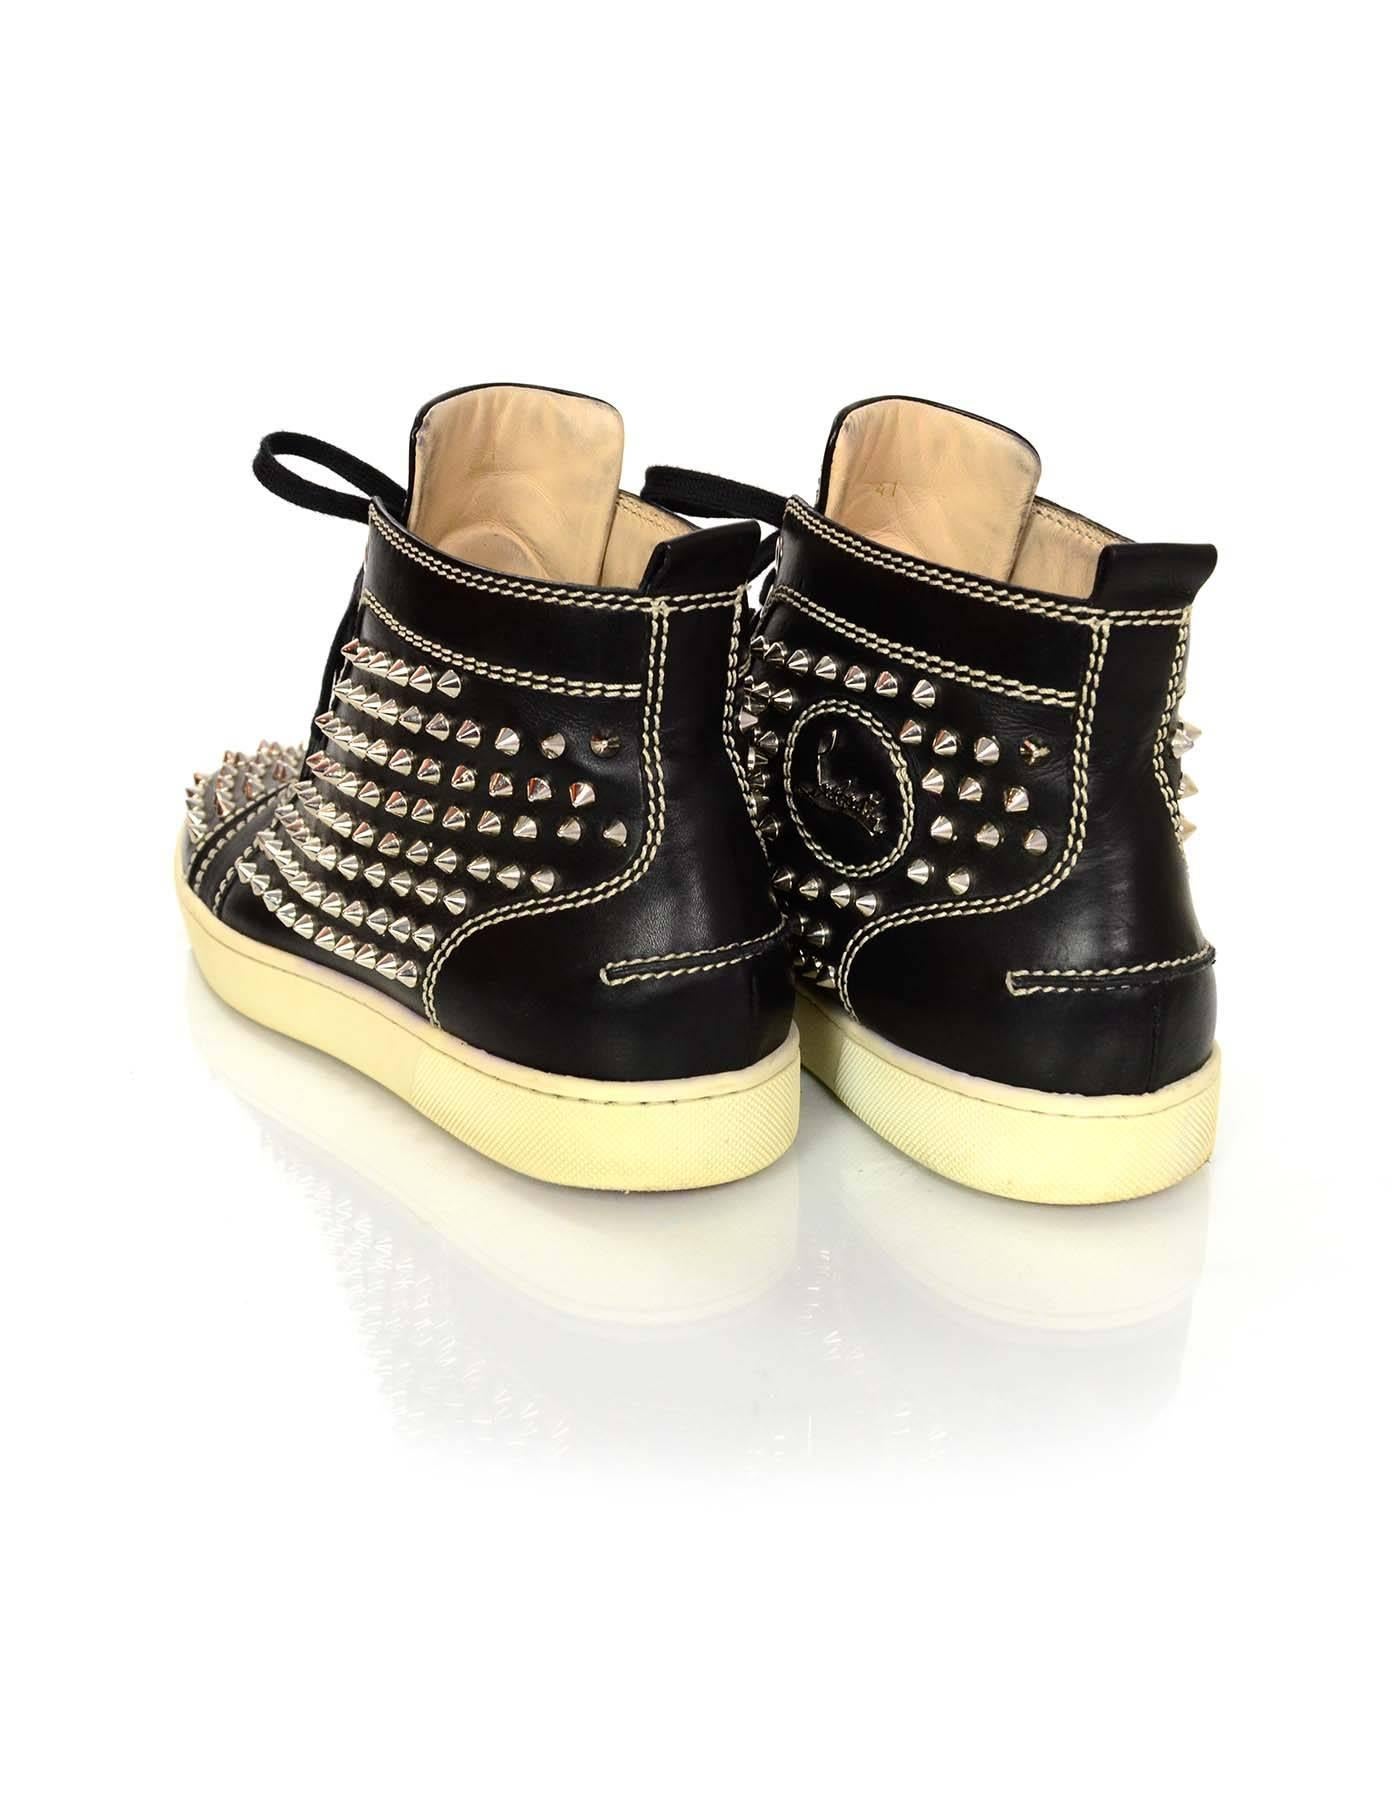 Christian Louboutin Black Leather Louis Spike High-top Studded Sneakers Sz 41 1